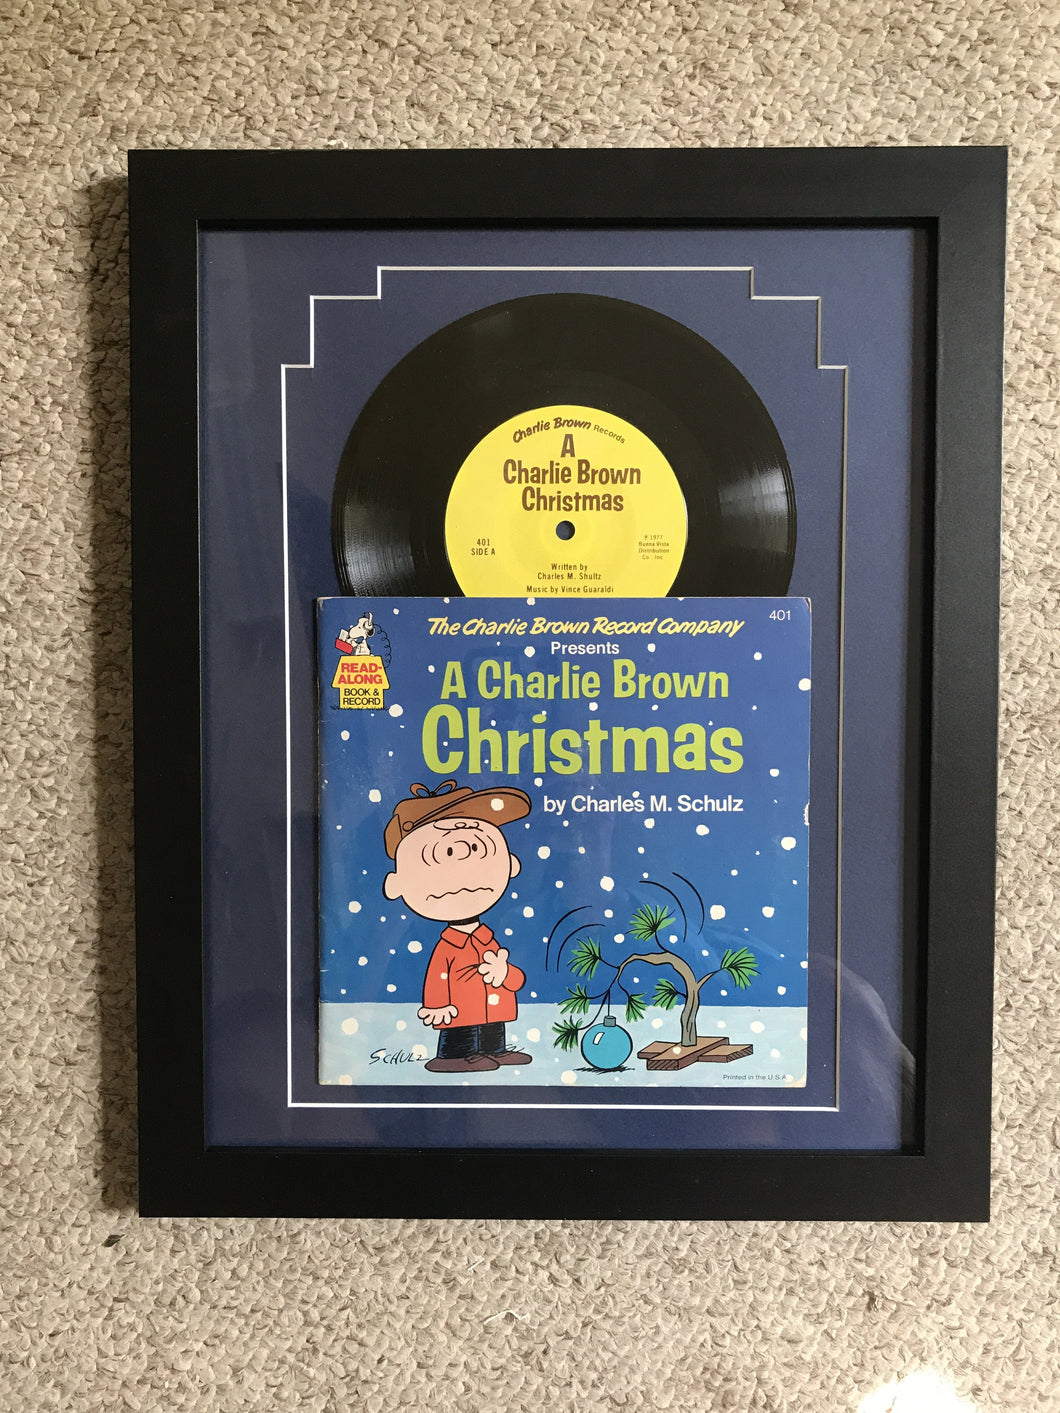 “A Charlie Brown Christmas” vintage record matted and framed.